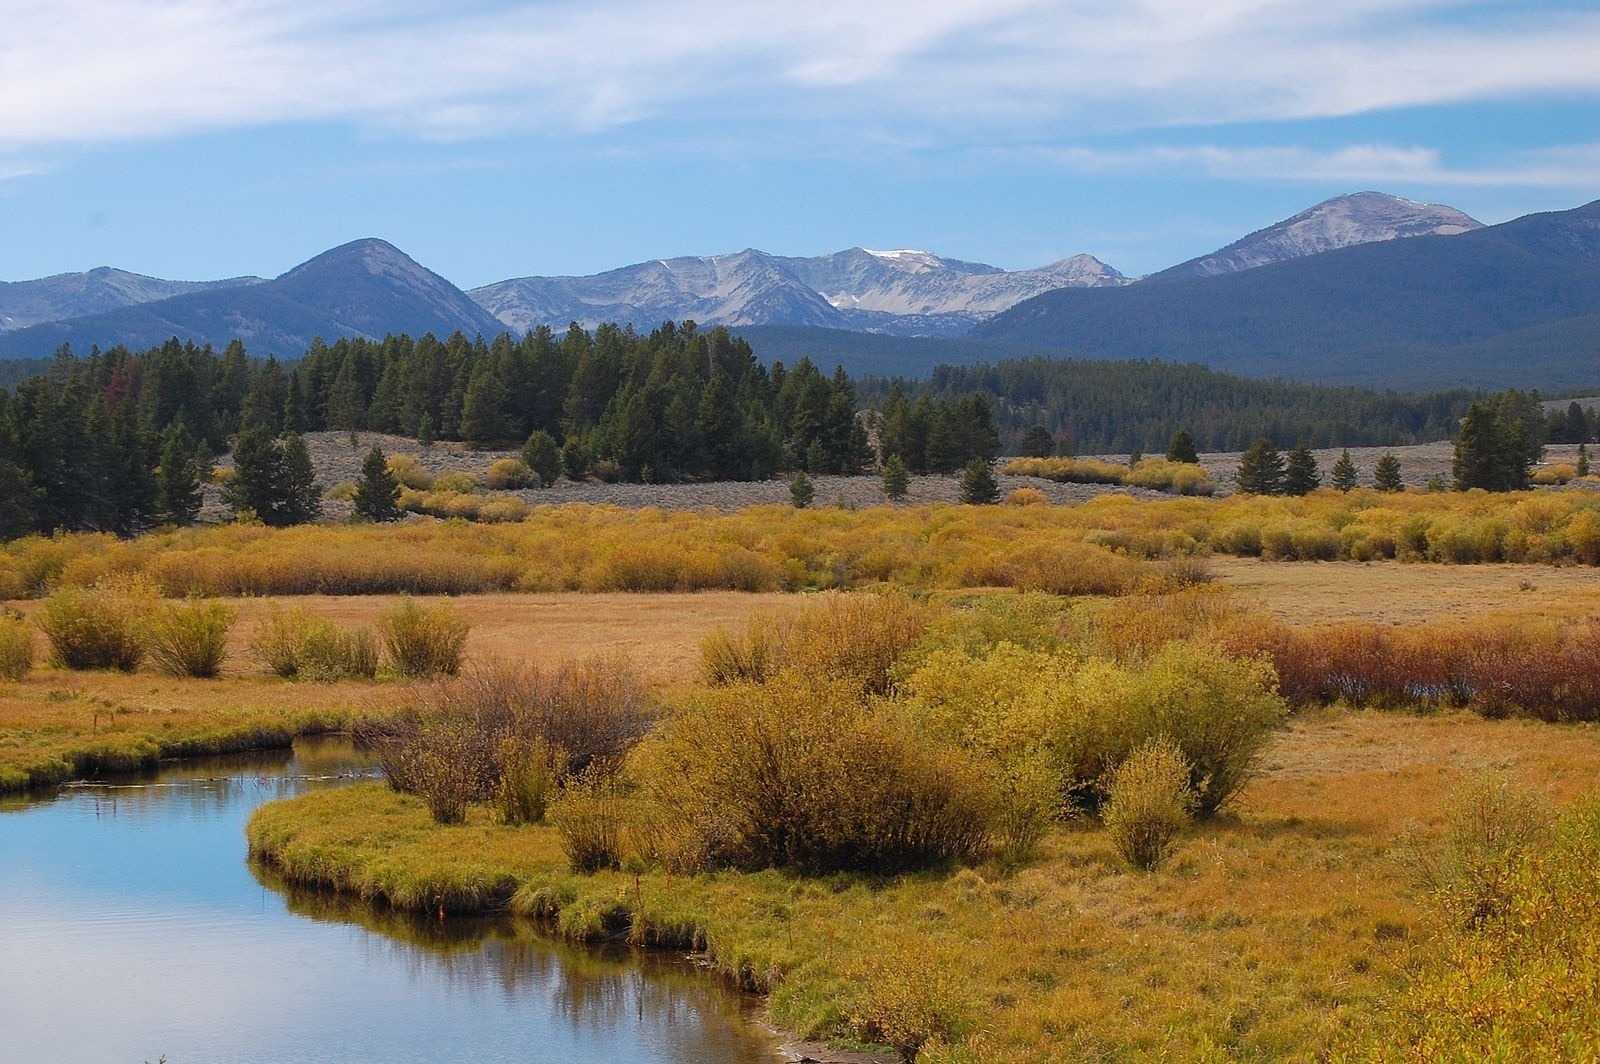 Shoring up the northwestern tier of Greater Yellowstone, the Beaverhead-Deerlodge National Forest  represents a key part of the ecosystem's connectedness to wildlands farther north.  Image courtesy imgur user Fredlyfish4